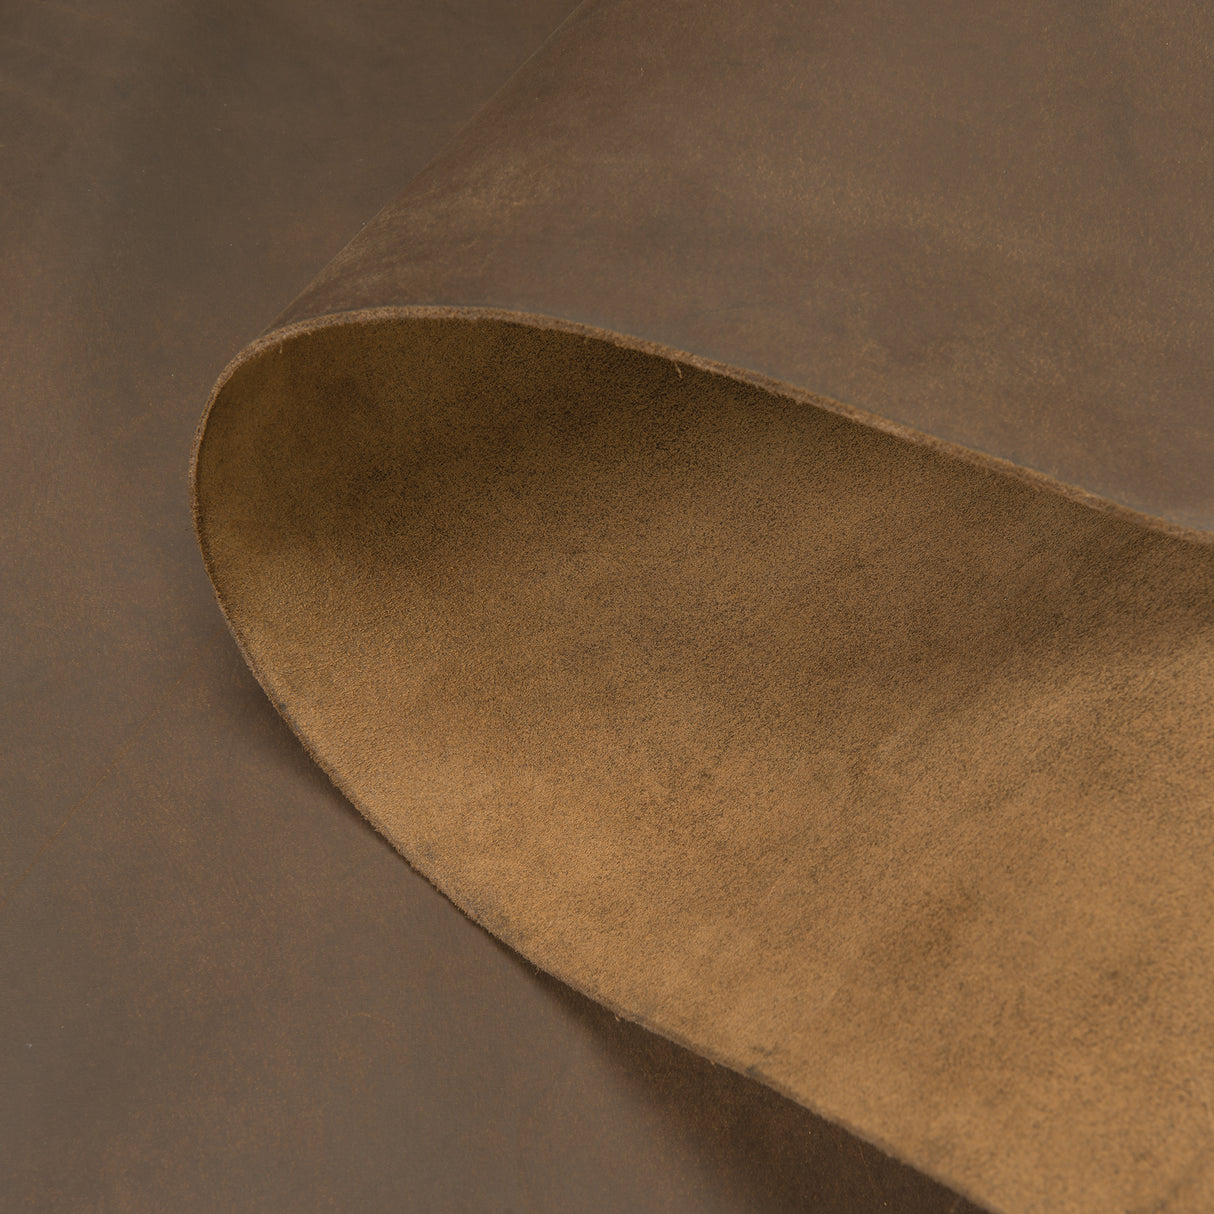 Matte Chrome Tanned Water Buffalo Leather, 5-6 oz.